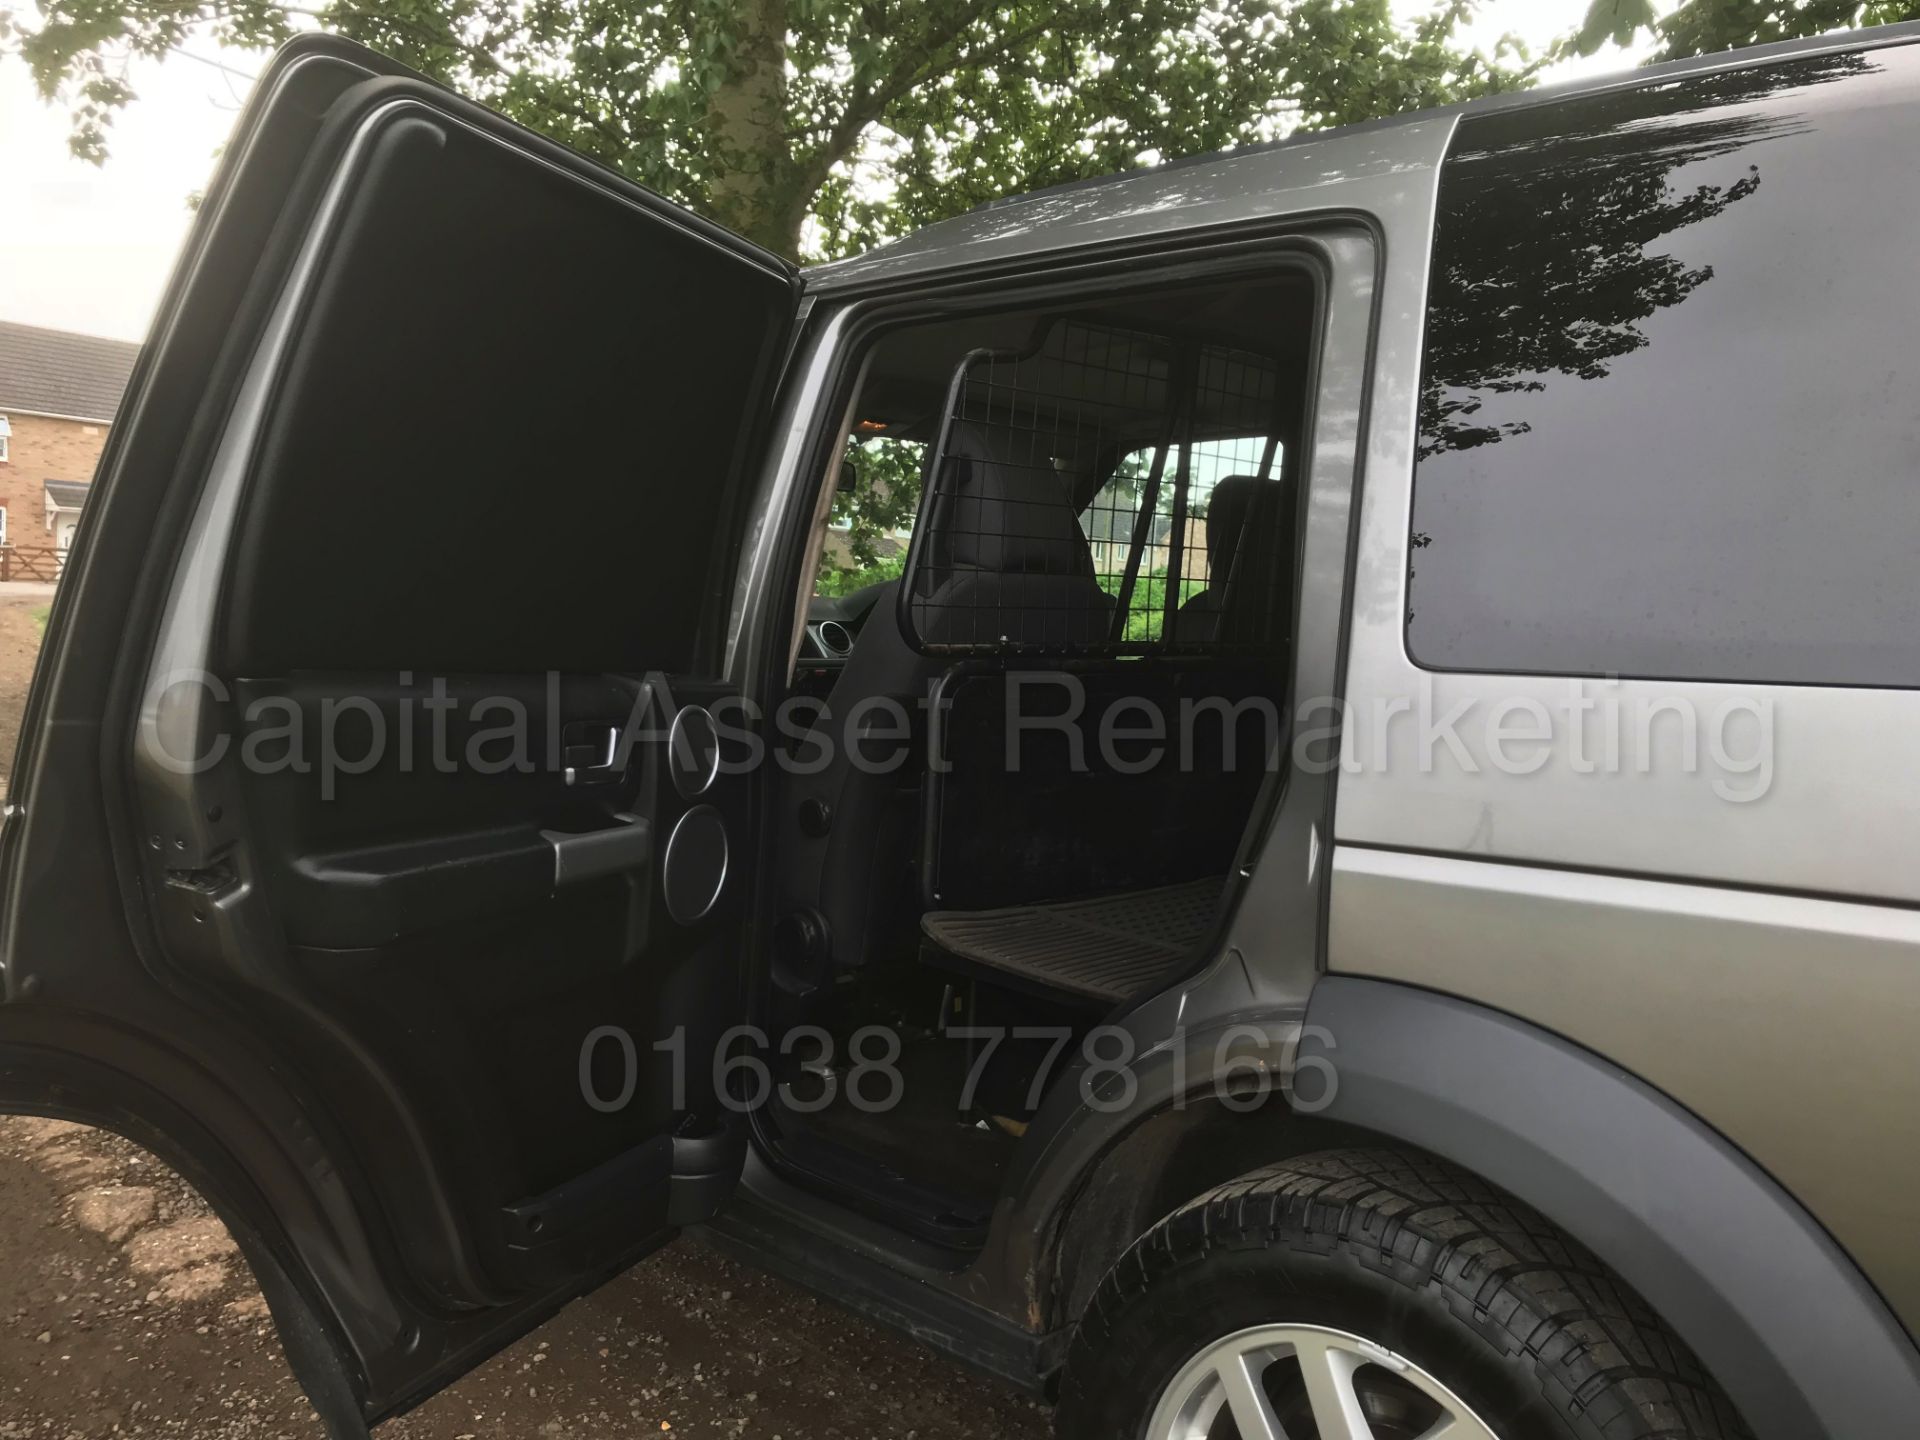 (On Sale) LAND ROVER DISCOVERY 3 'XS EDITION' **COMMERCIAL VAN**(2008 MODEL) 'TDV6-190 BHP' (NO VAT) - Image 19 of 38